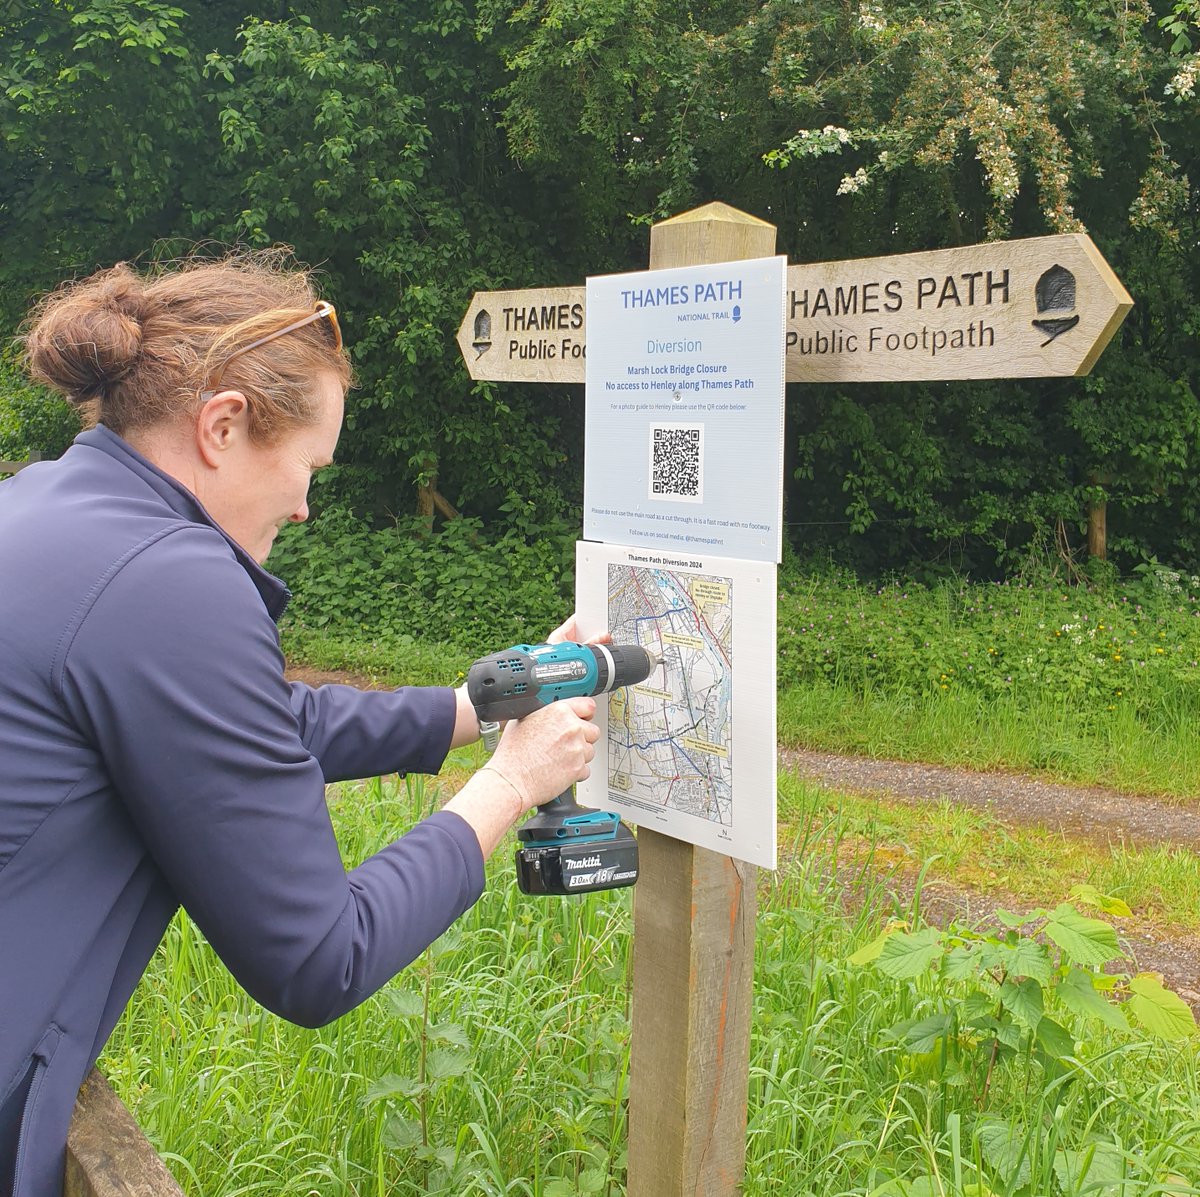 Trail manager Hannah putting up signs about the #ThamesPath National Trail diversion between Shiplake and Henley #fingerpostfriday Download photo-guides to the route 👇nationaltrail.co.uk/en_GB/short-ro… @NationalTrails @NatTrailsUK @HenleyTCM @RiverThames @river_rowing @HenleyTrains